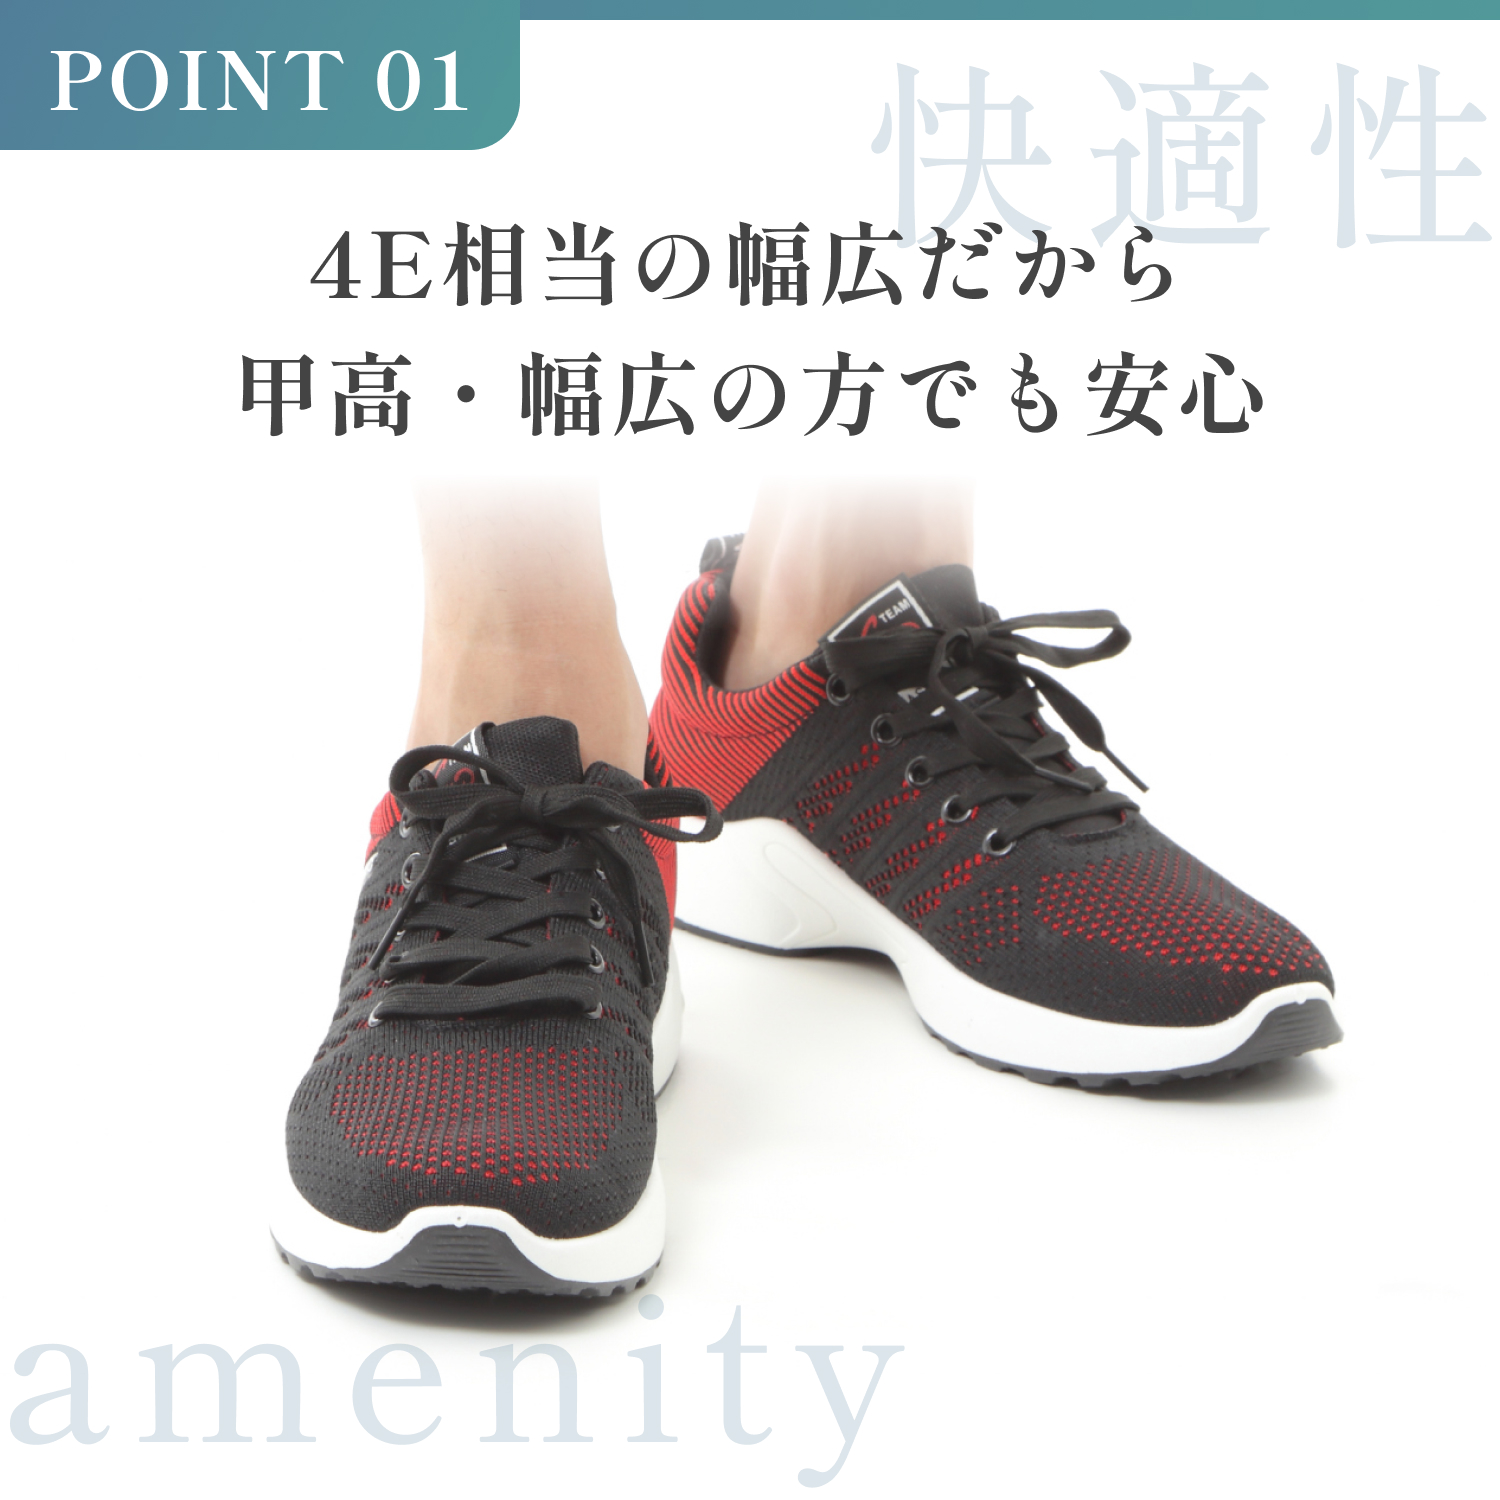  running shoes men's wide width sport shoes thickness bottom stylish cushion 40 fee 50 fee 60 fee usually put on footwear 